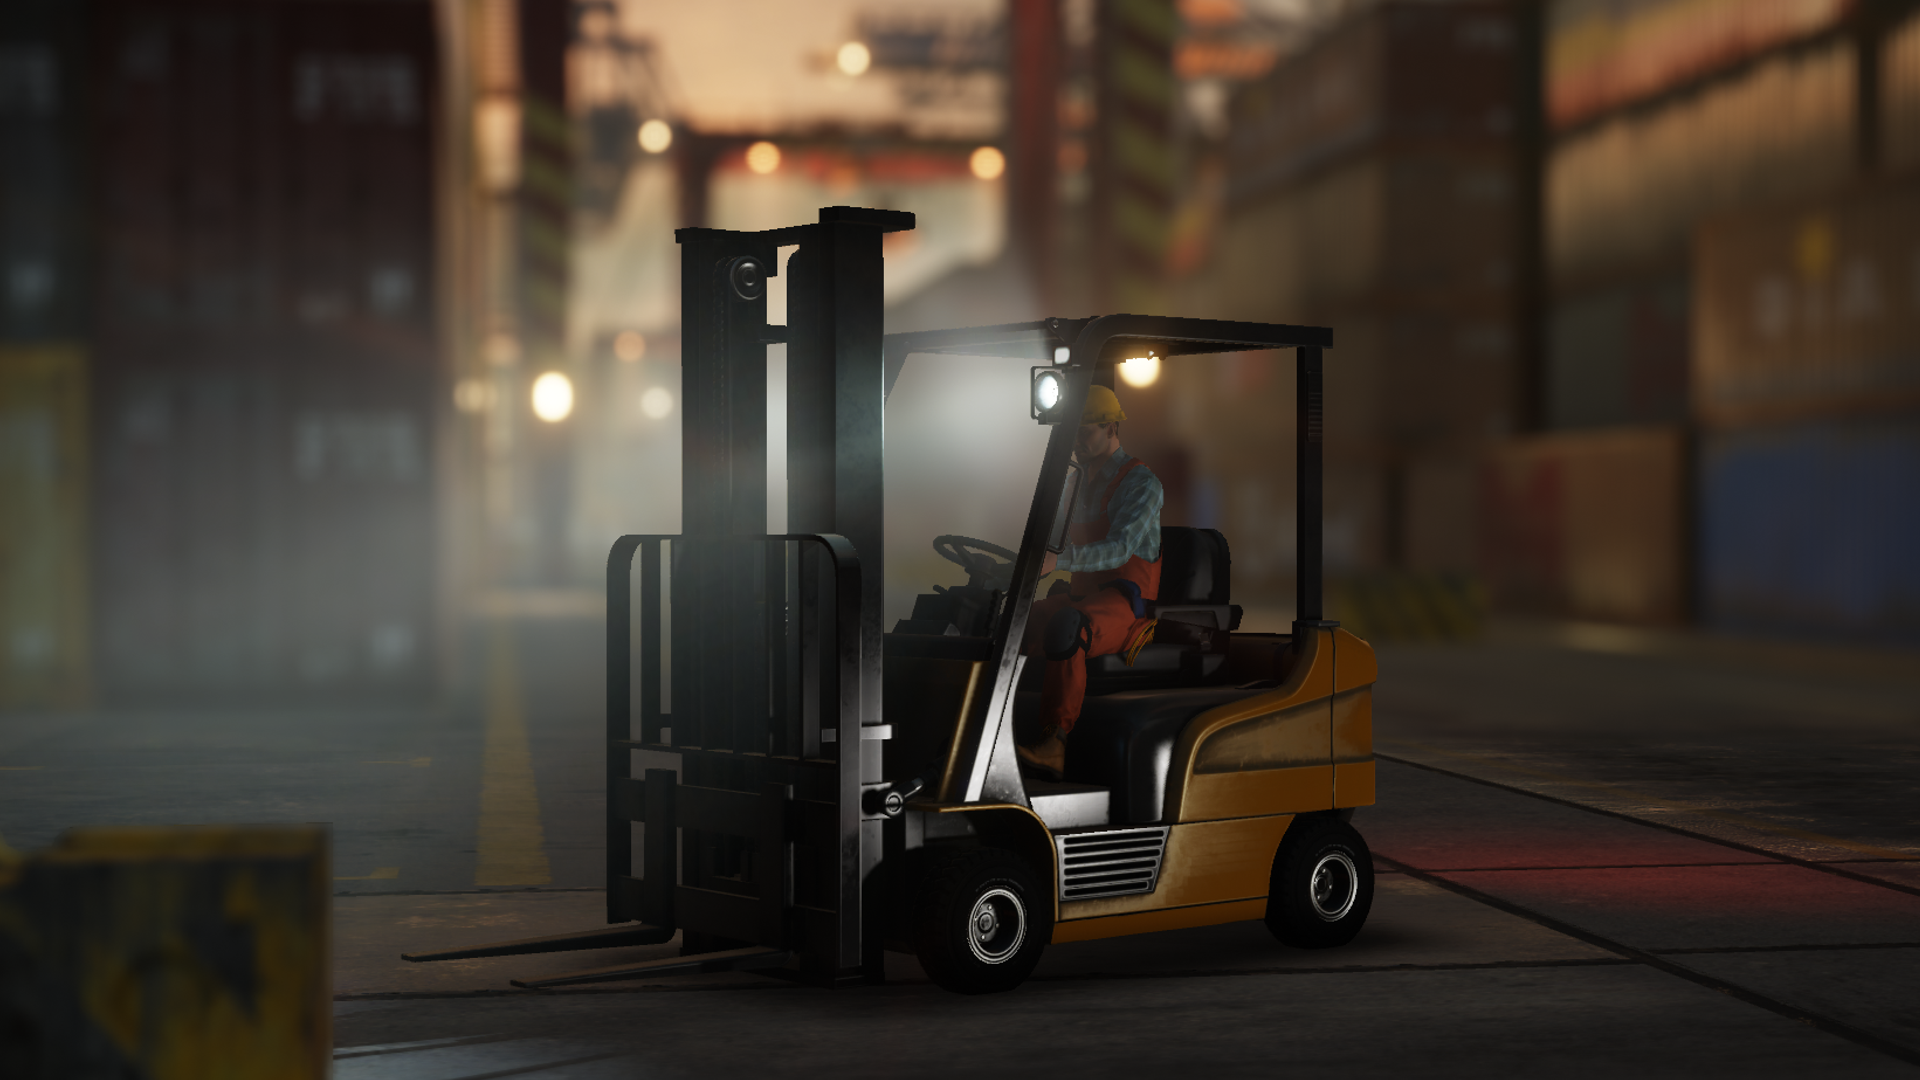 Icon for Forklift Tagging